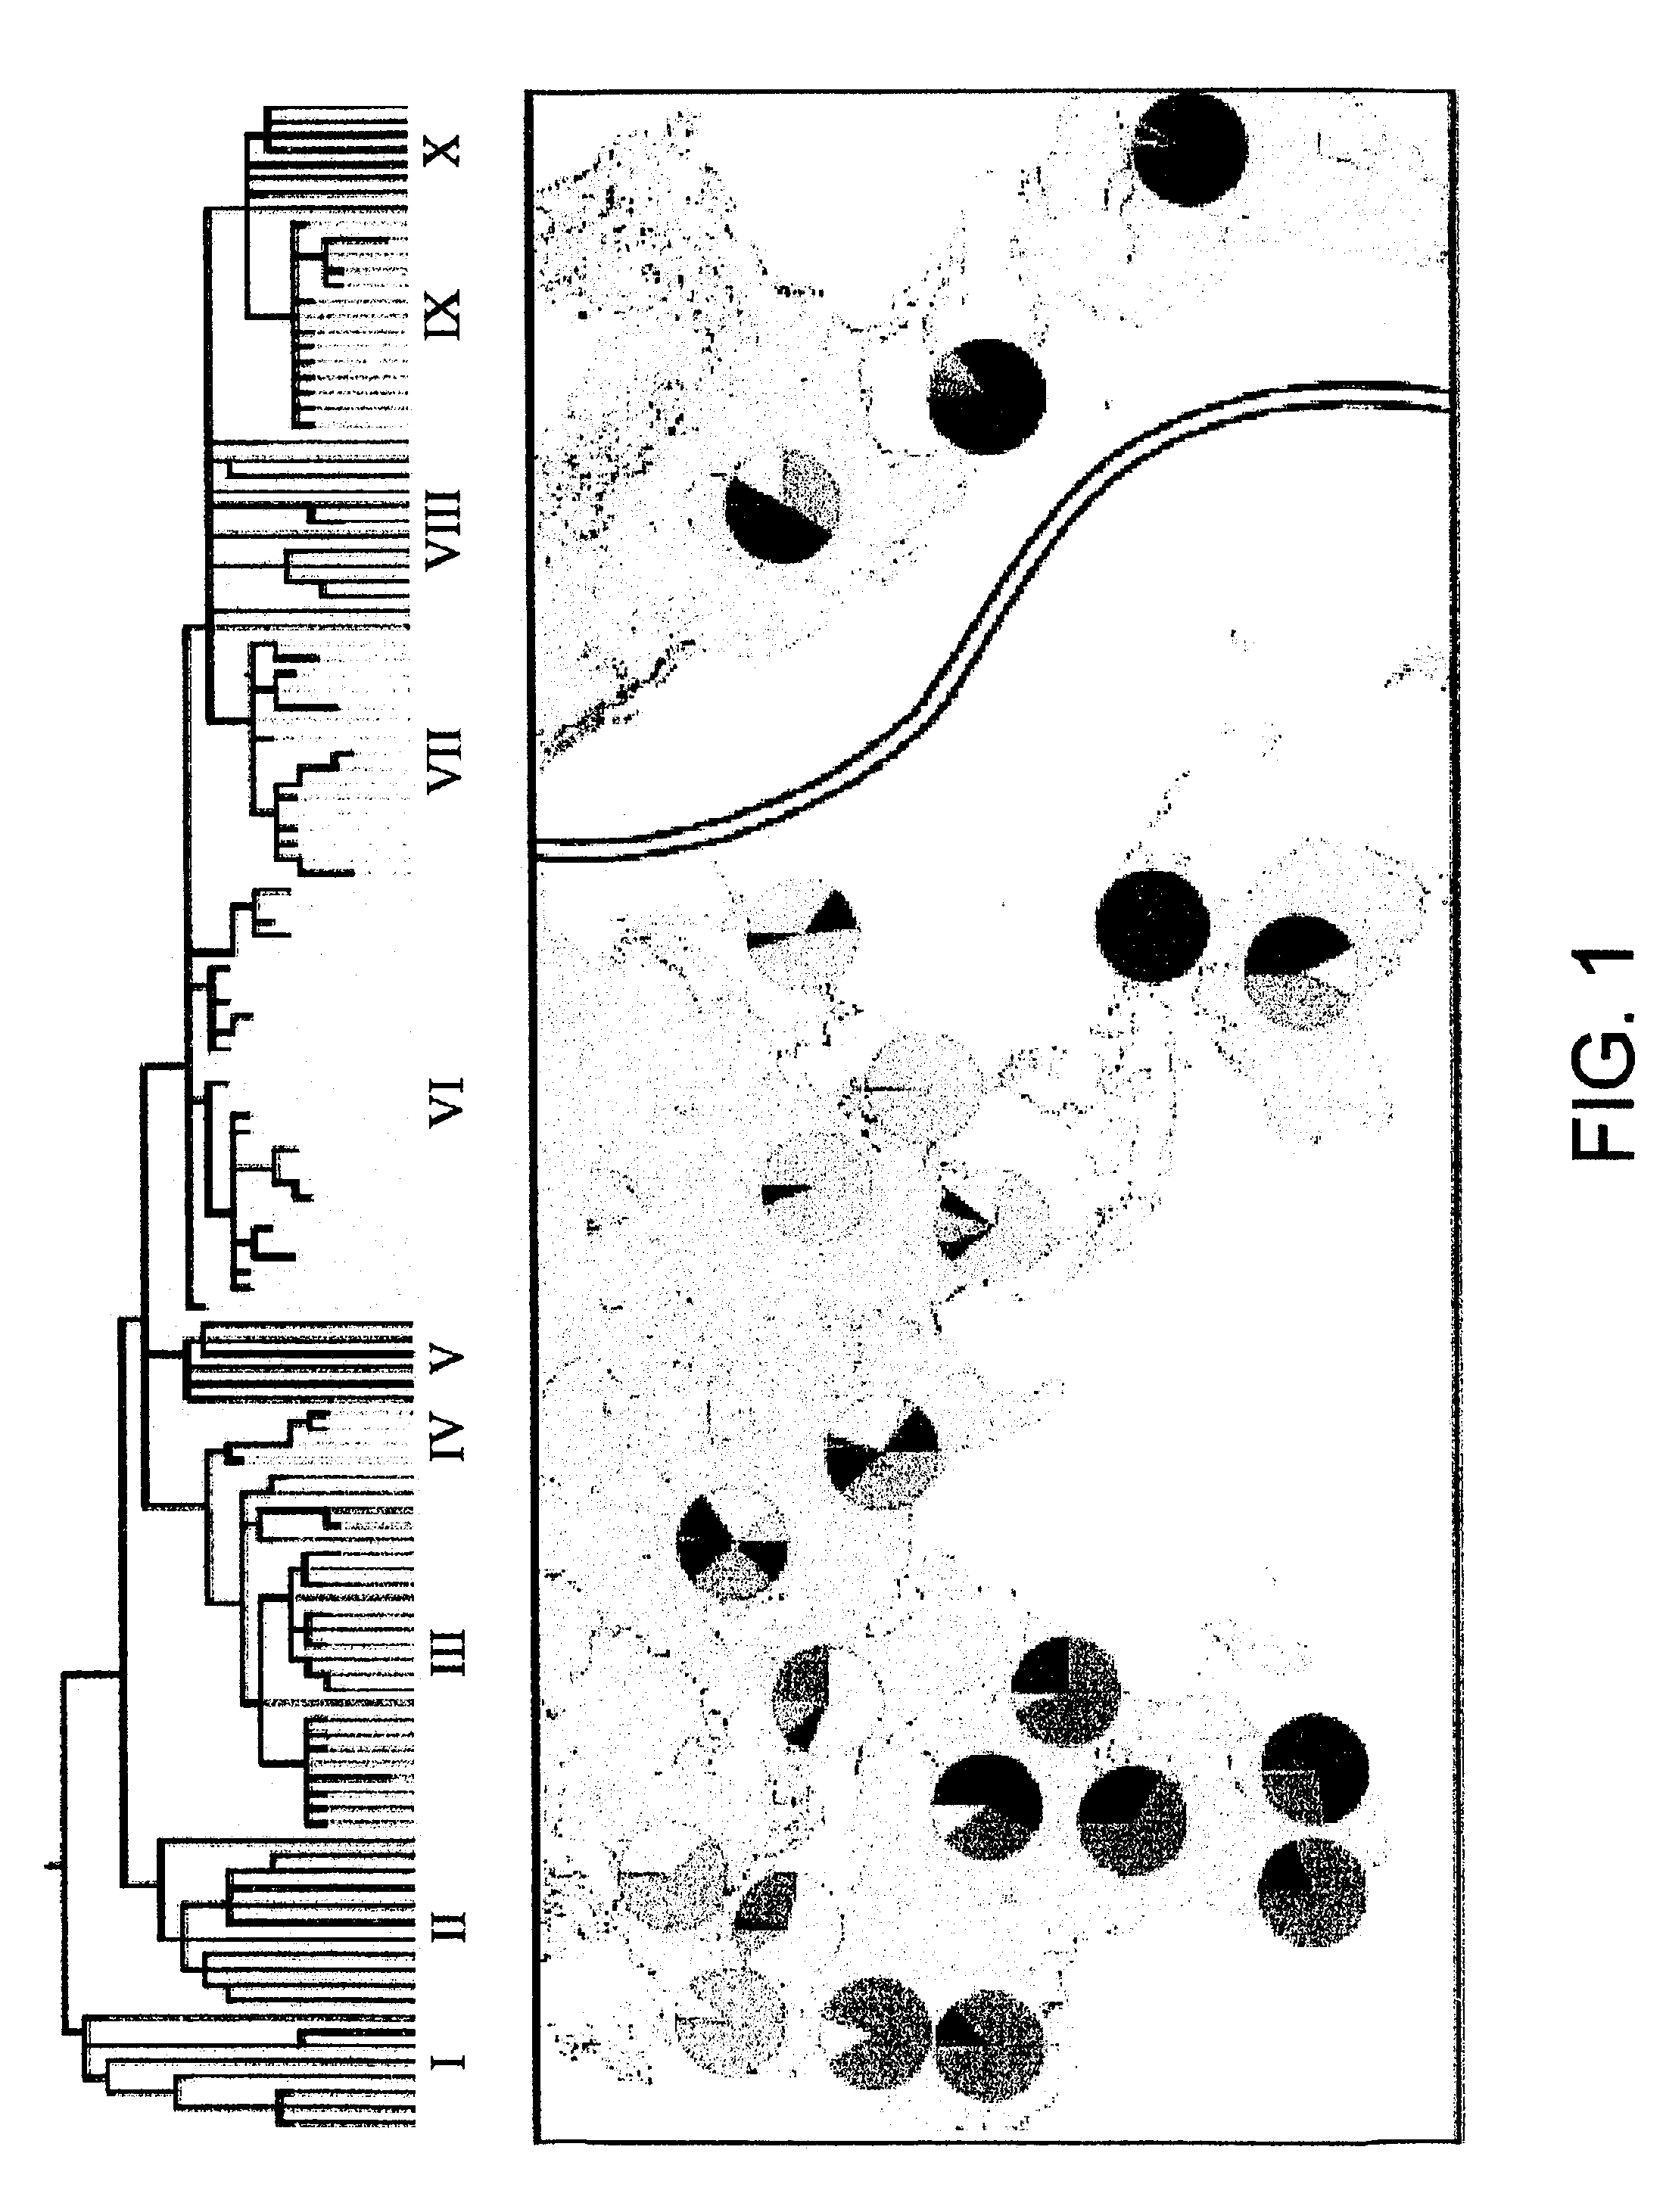 Method for determining genetic affiliation, substructure and gene flow within human populations